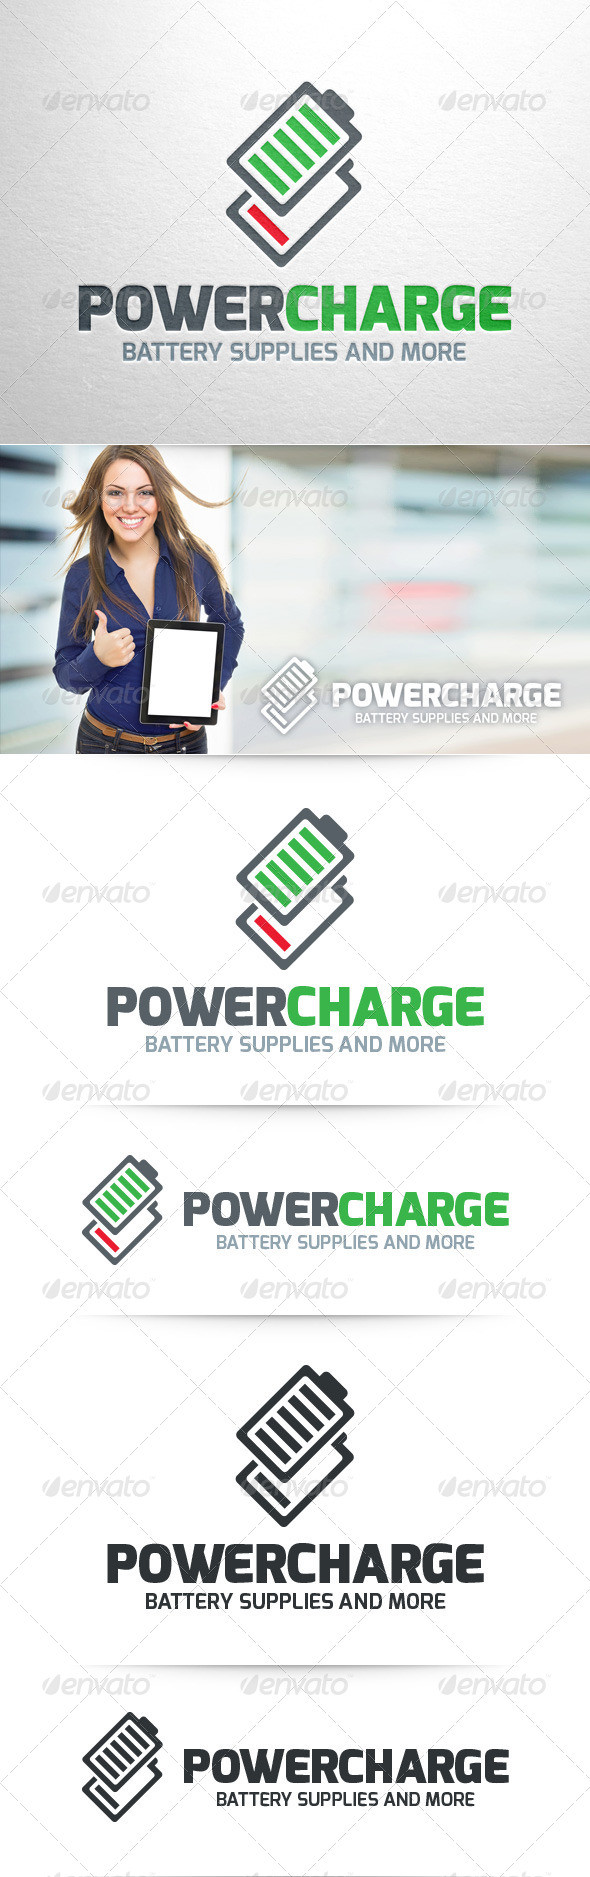 Battery charge logo